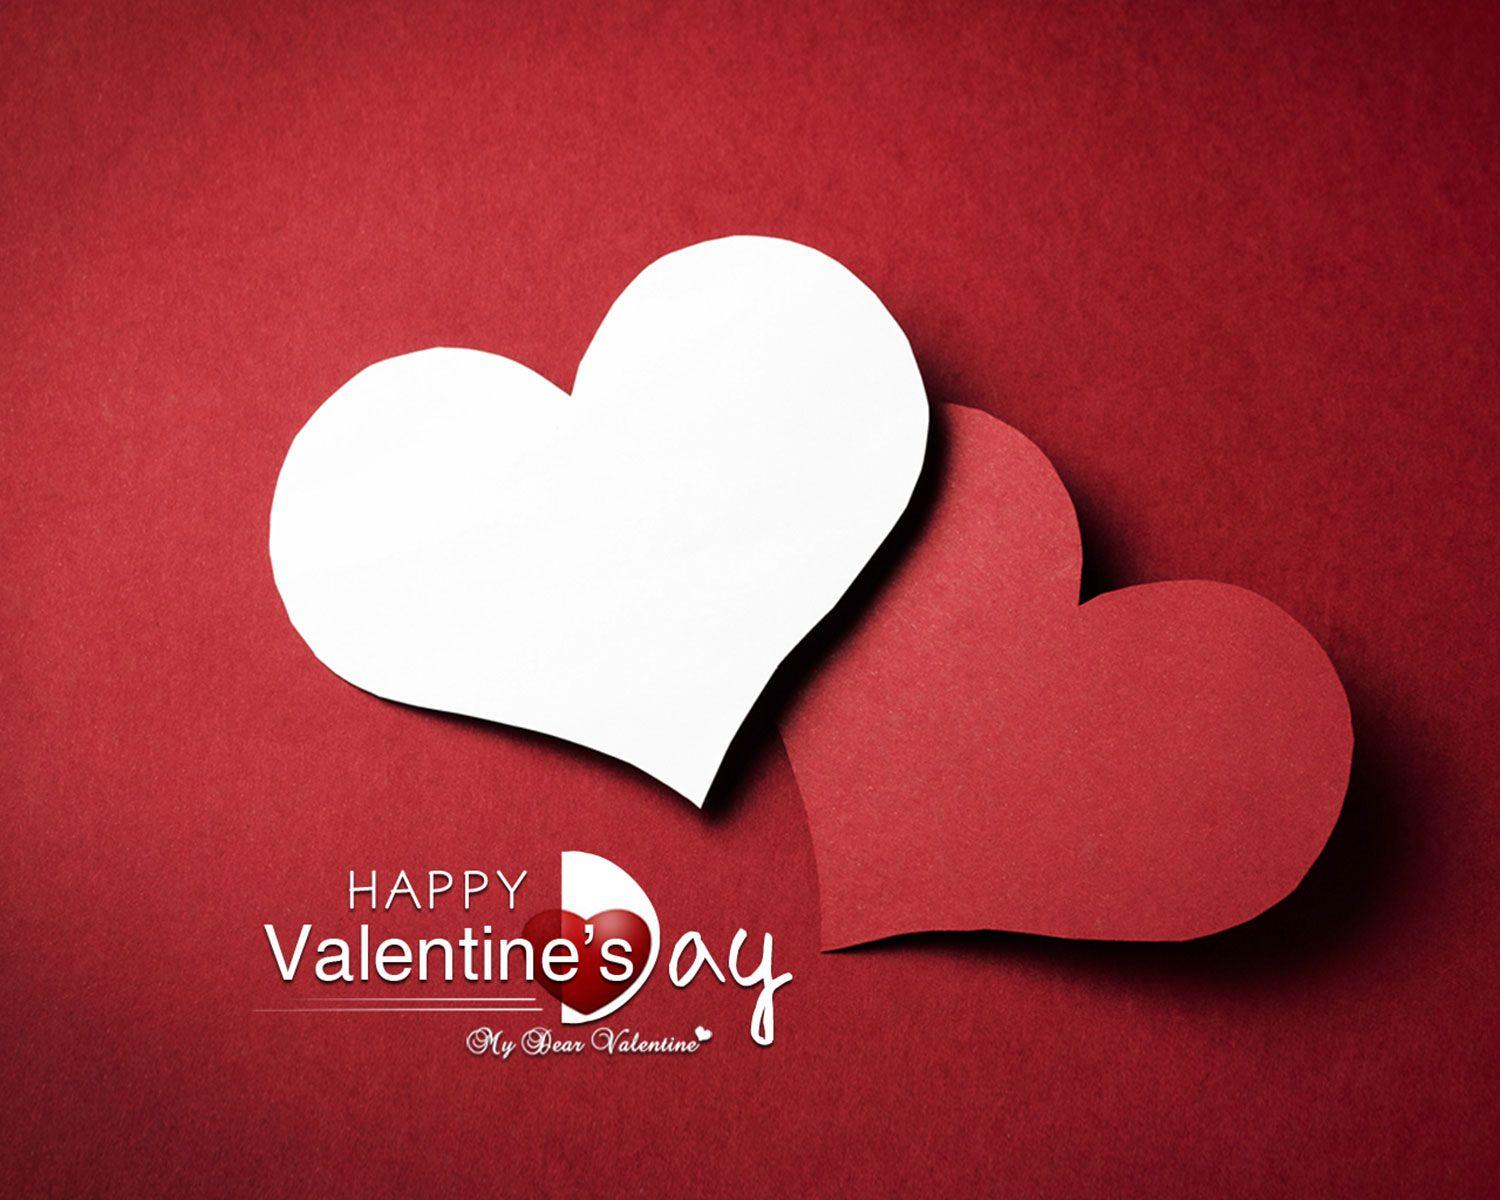 Valentines day hd wallpapers